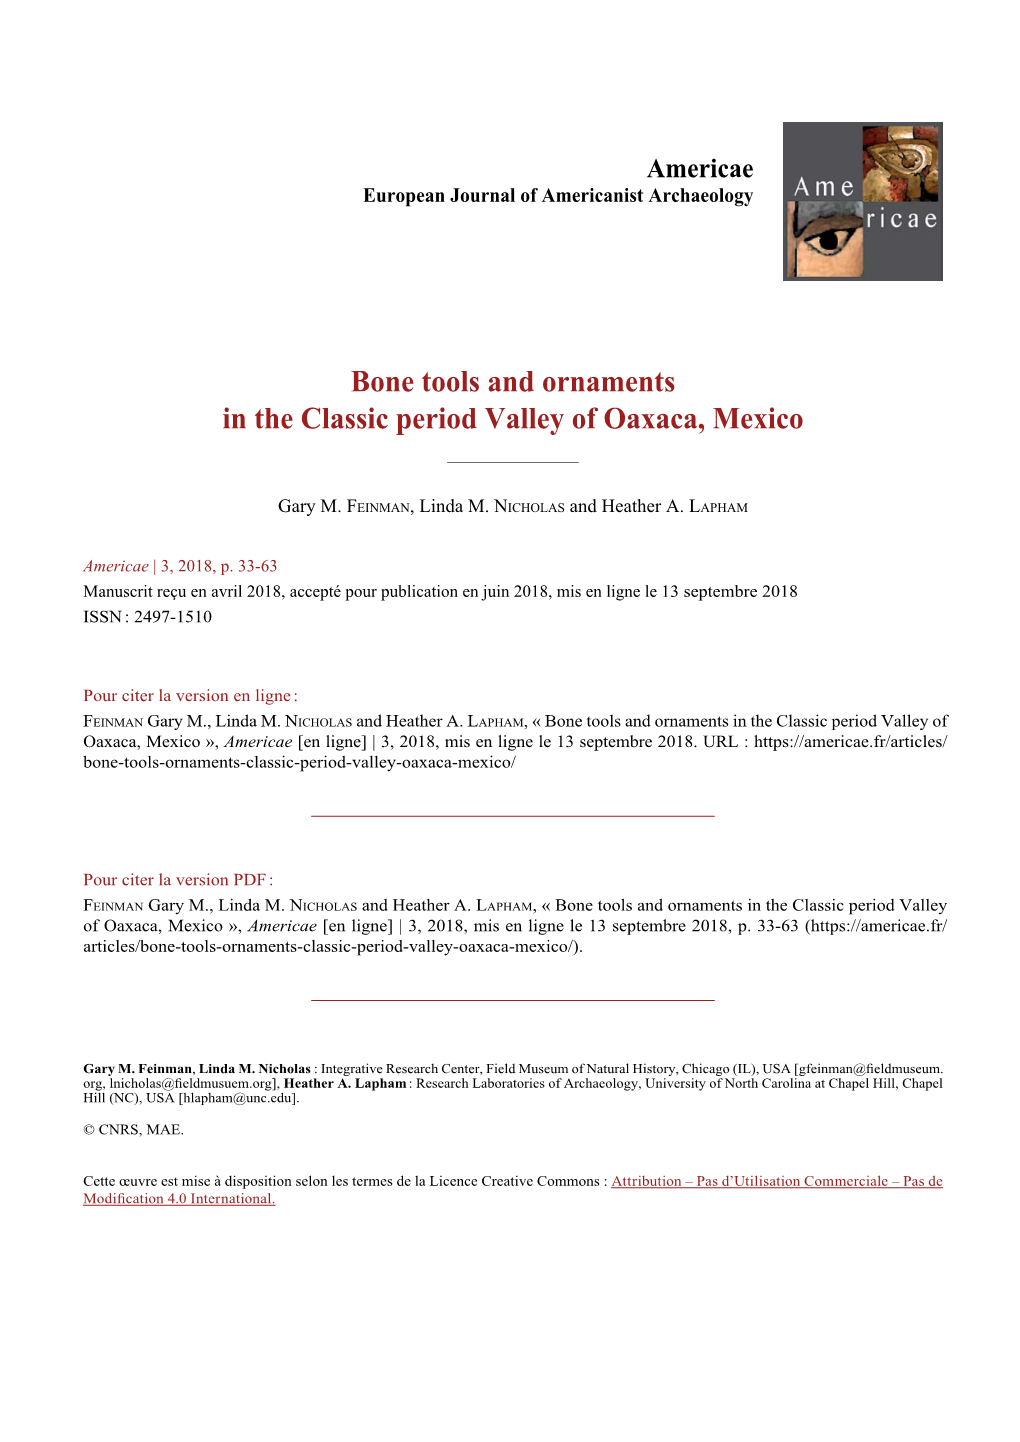 Bone Tools and Ornaments in the Classic Period Valley of Oaxaca, Mexico